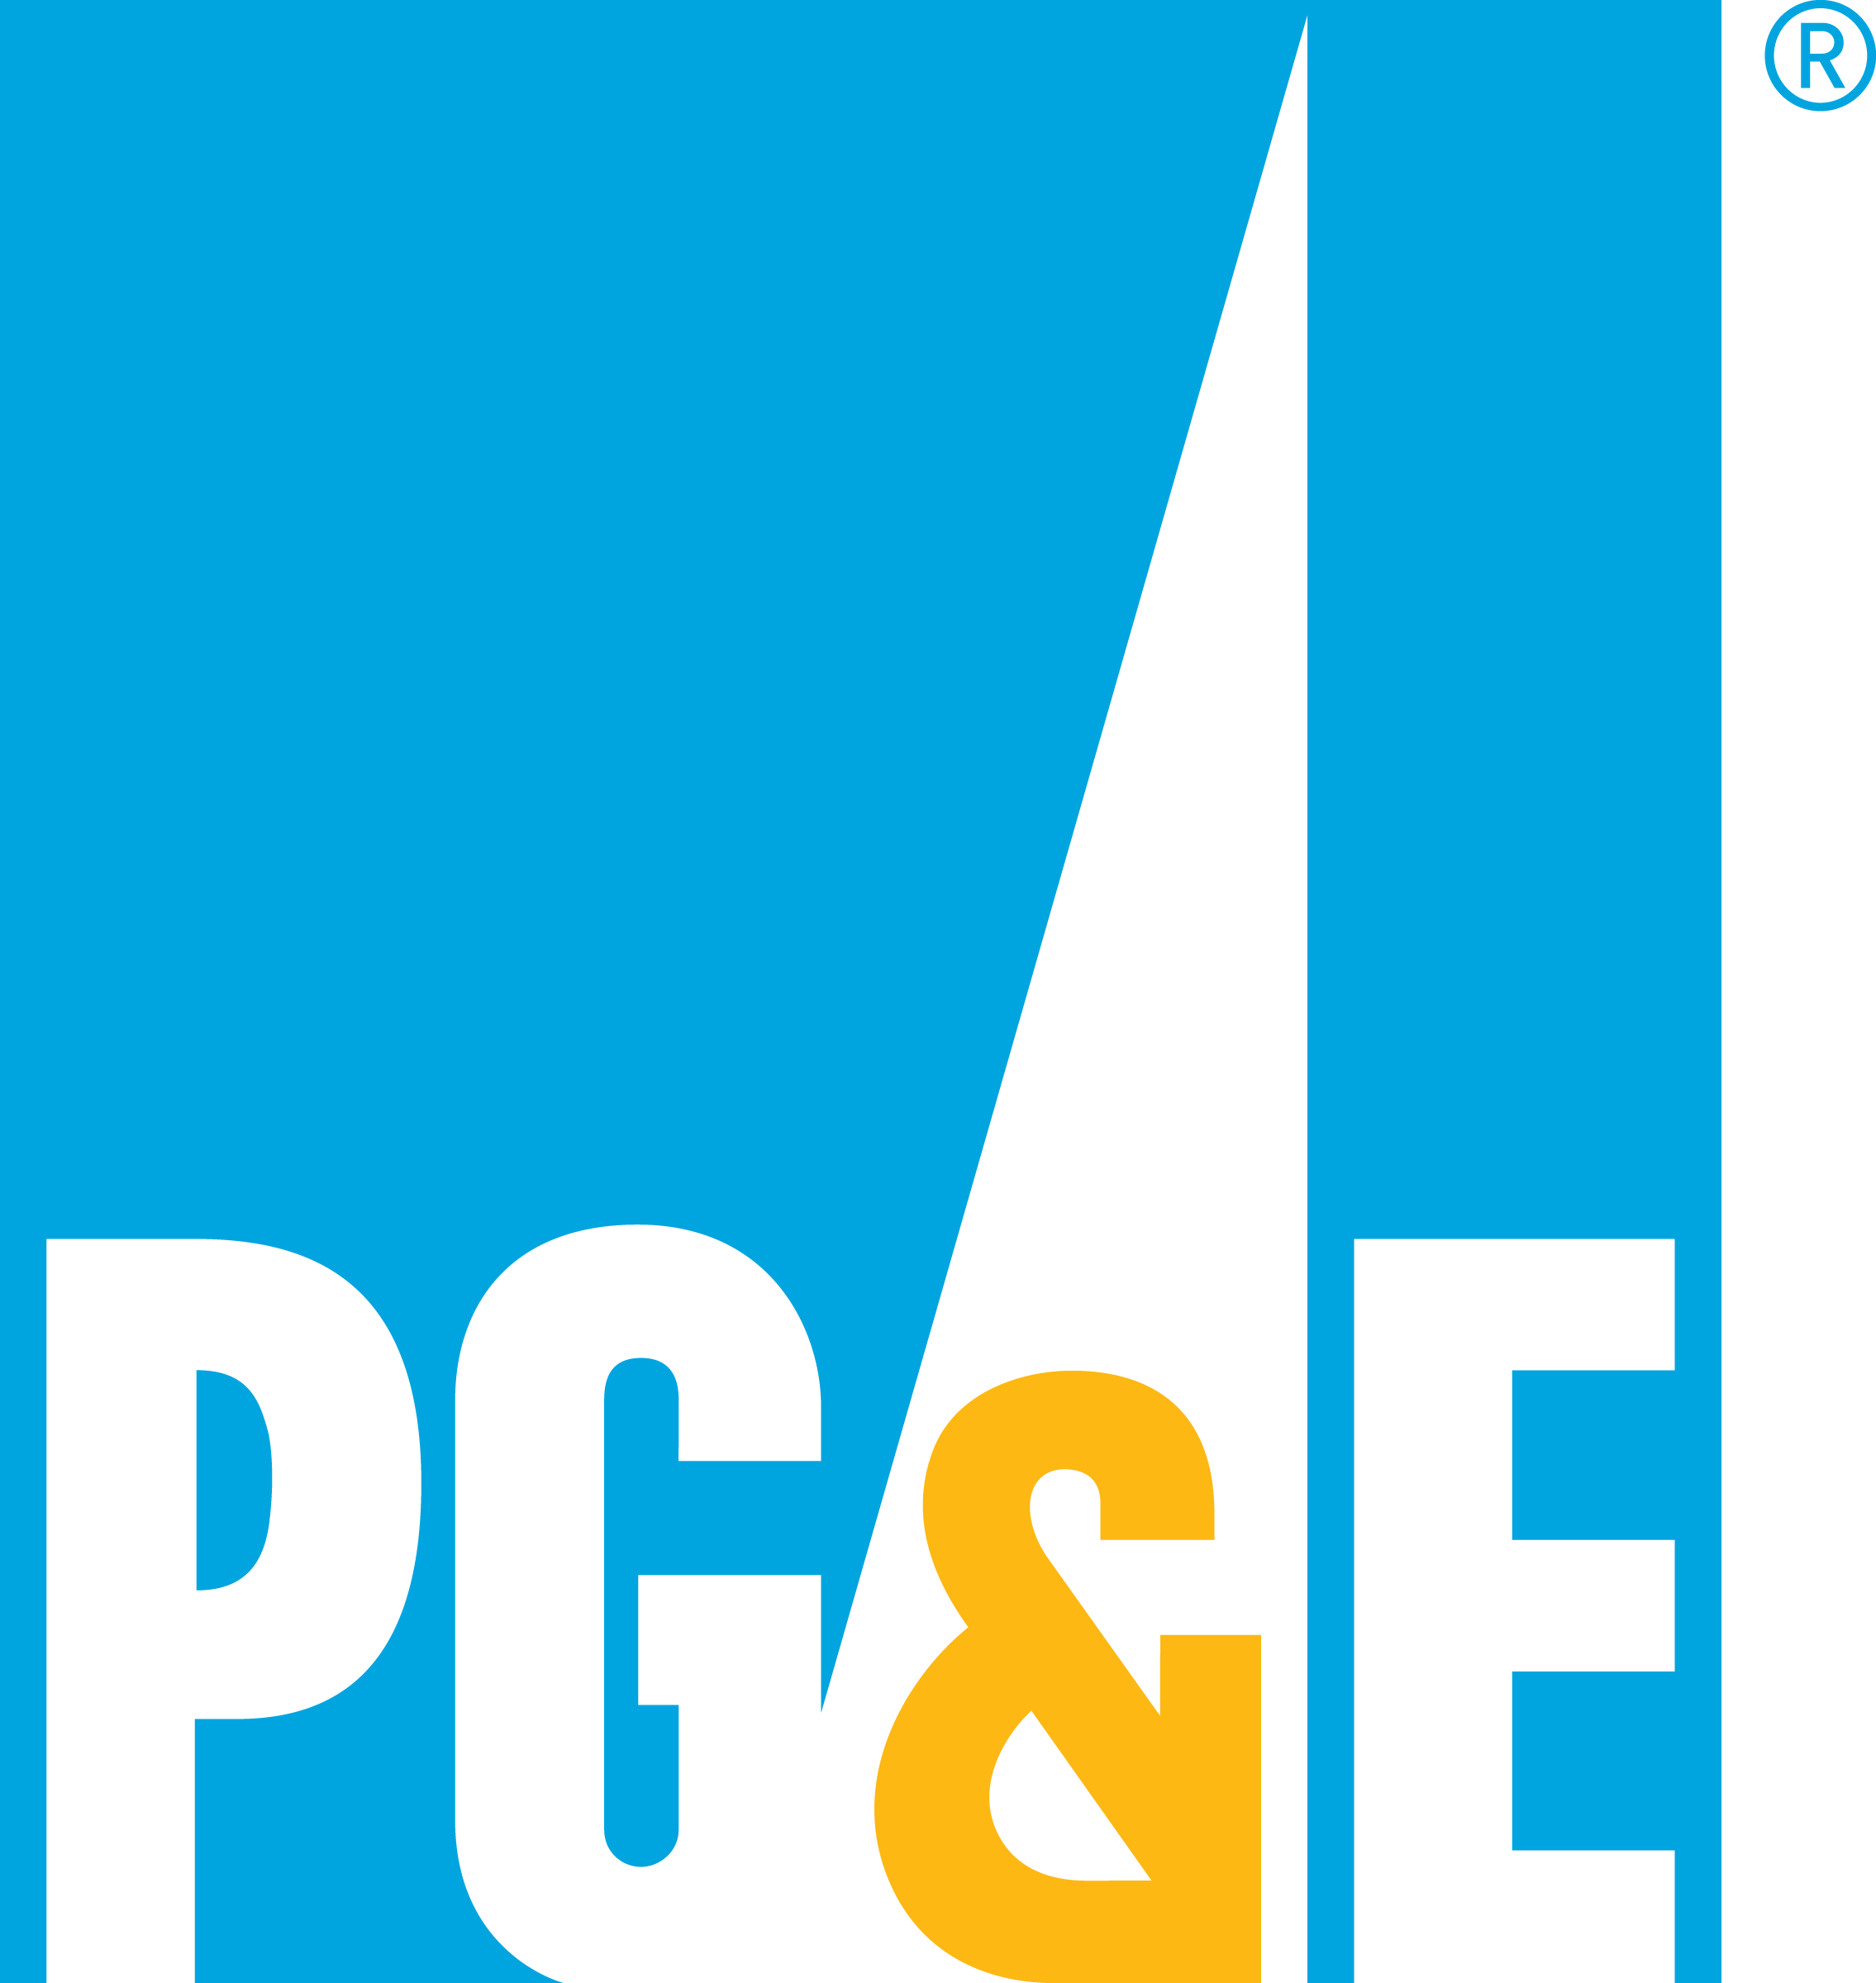 PG&E Logo - PG&E, Pacific Gas and Electric and power company for California